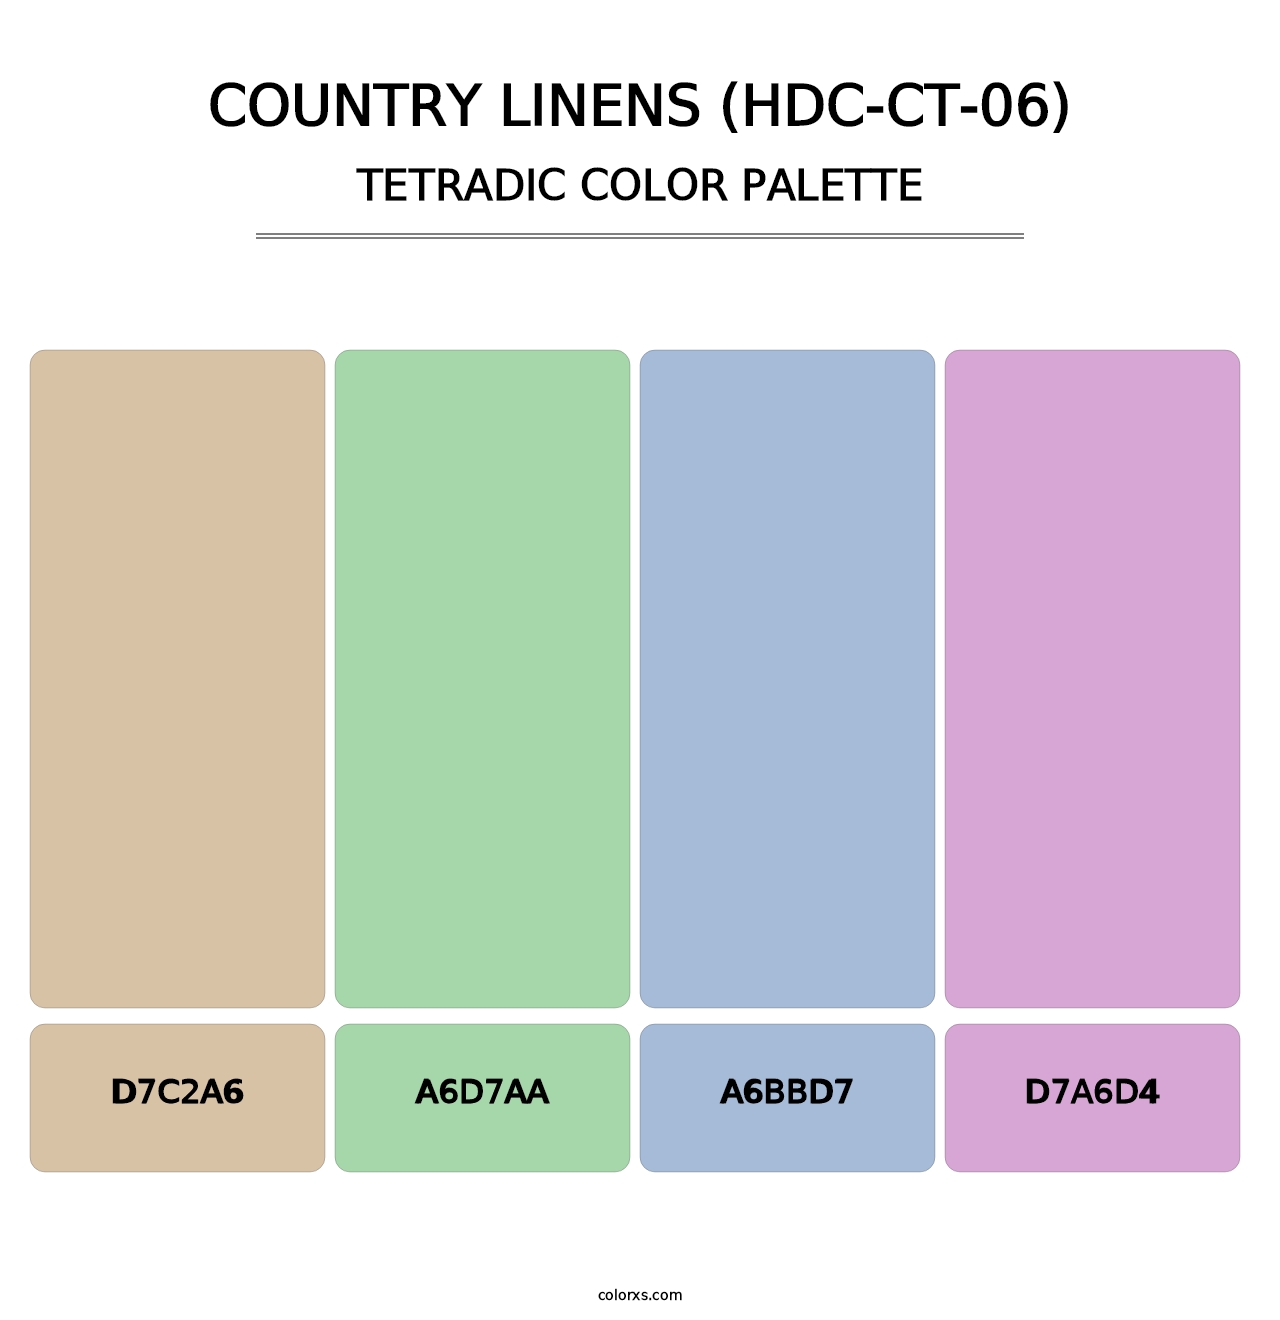 Country Linens (HDC-CT-06) - Tetradic Color Palette